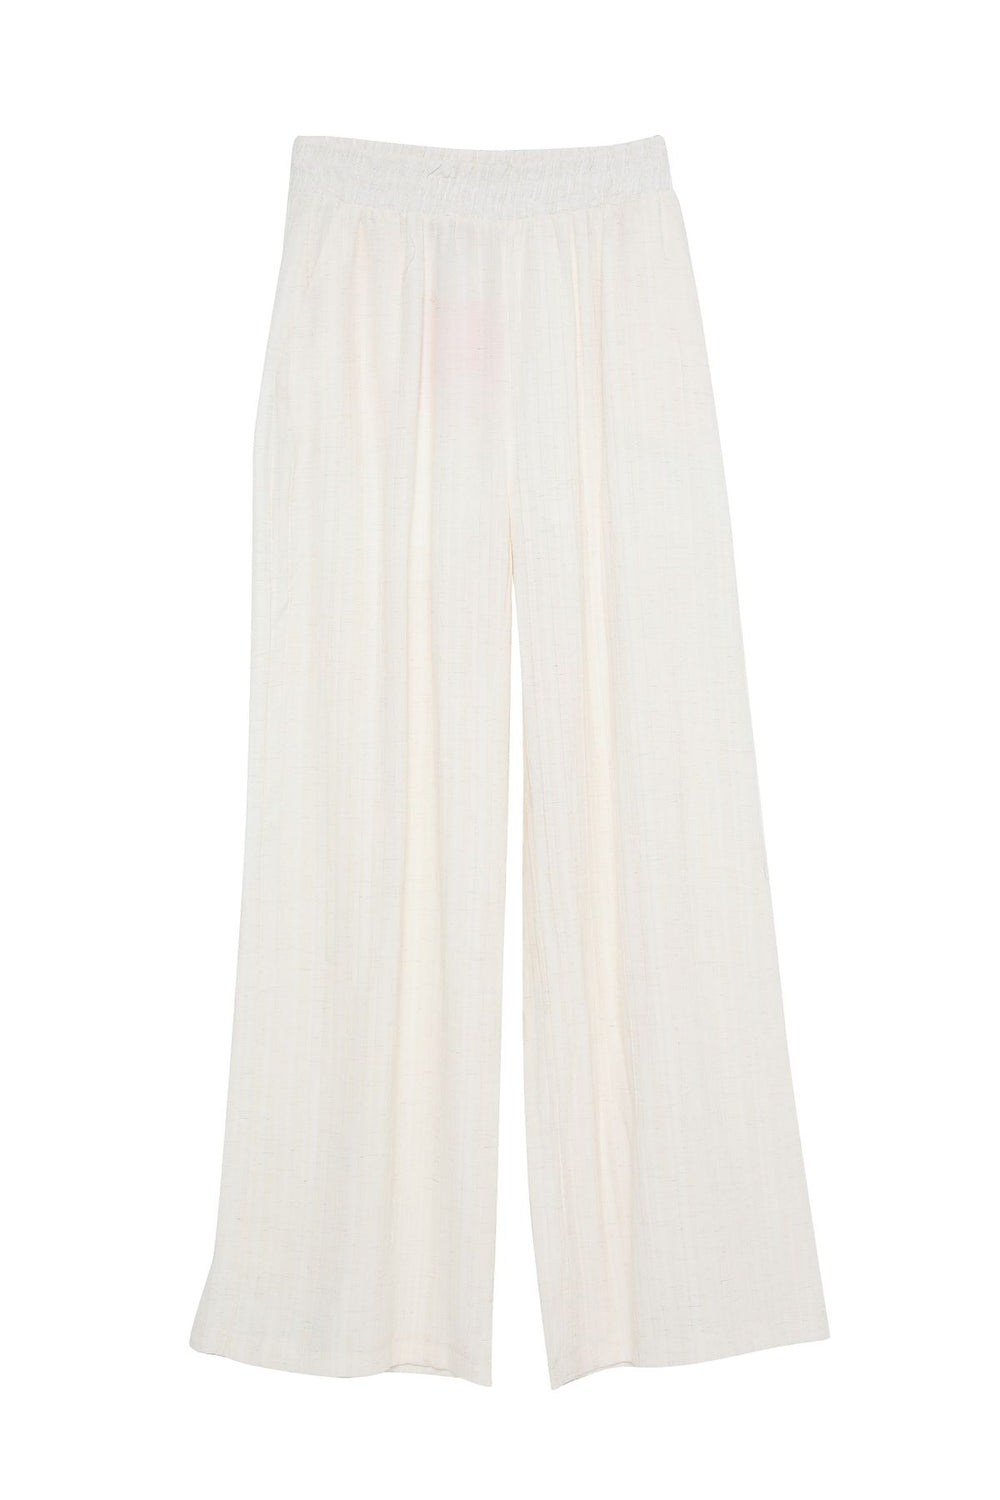 High Waist Trousers Natural with Elastic Waist